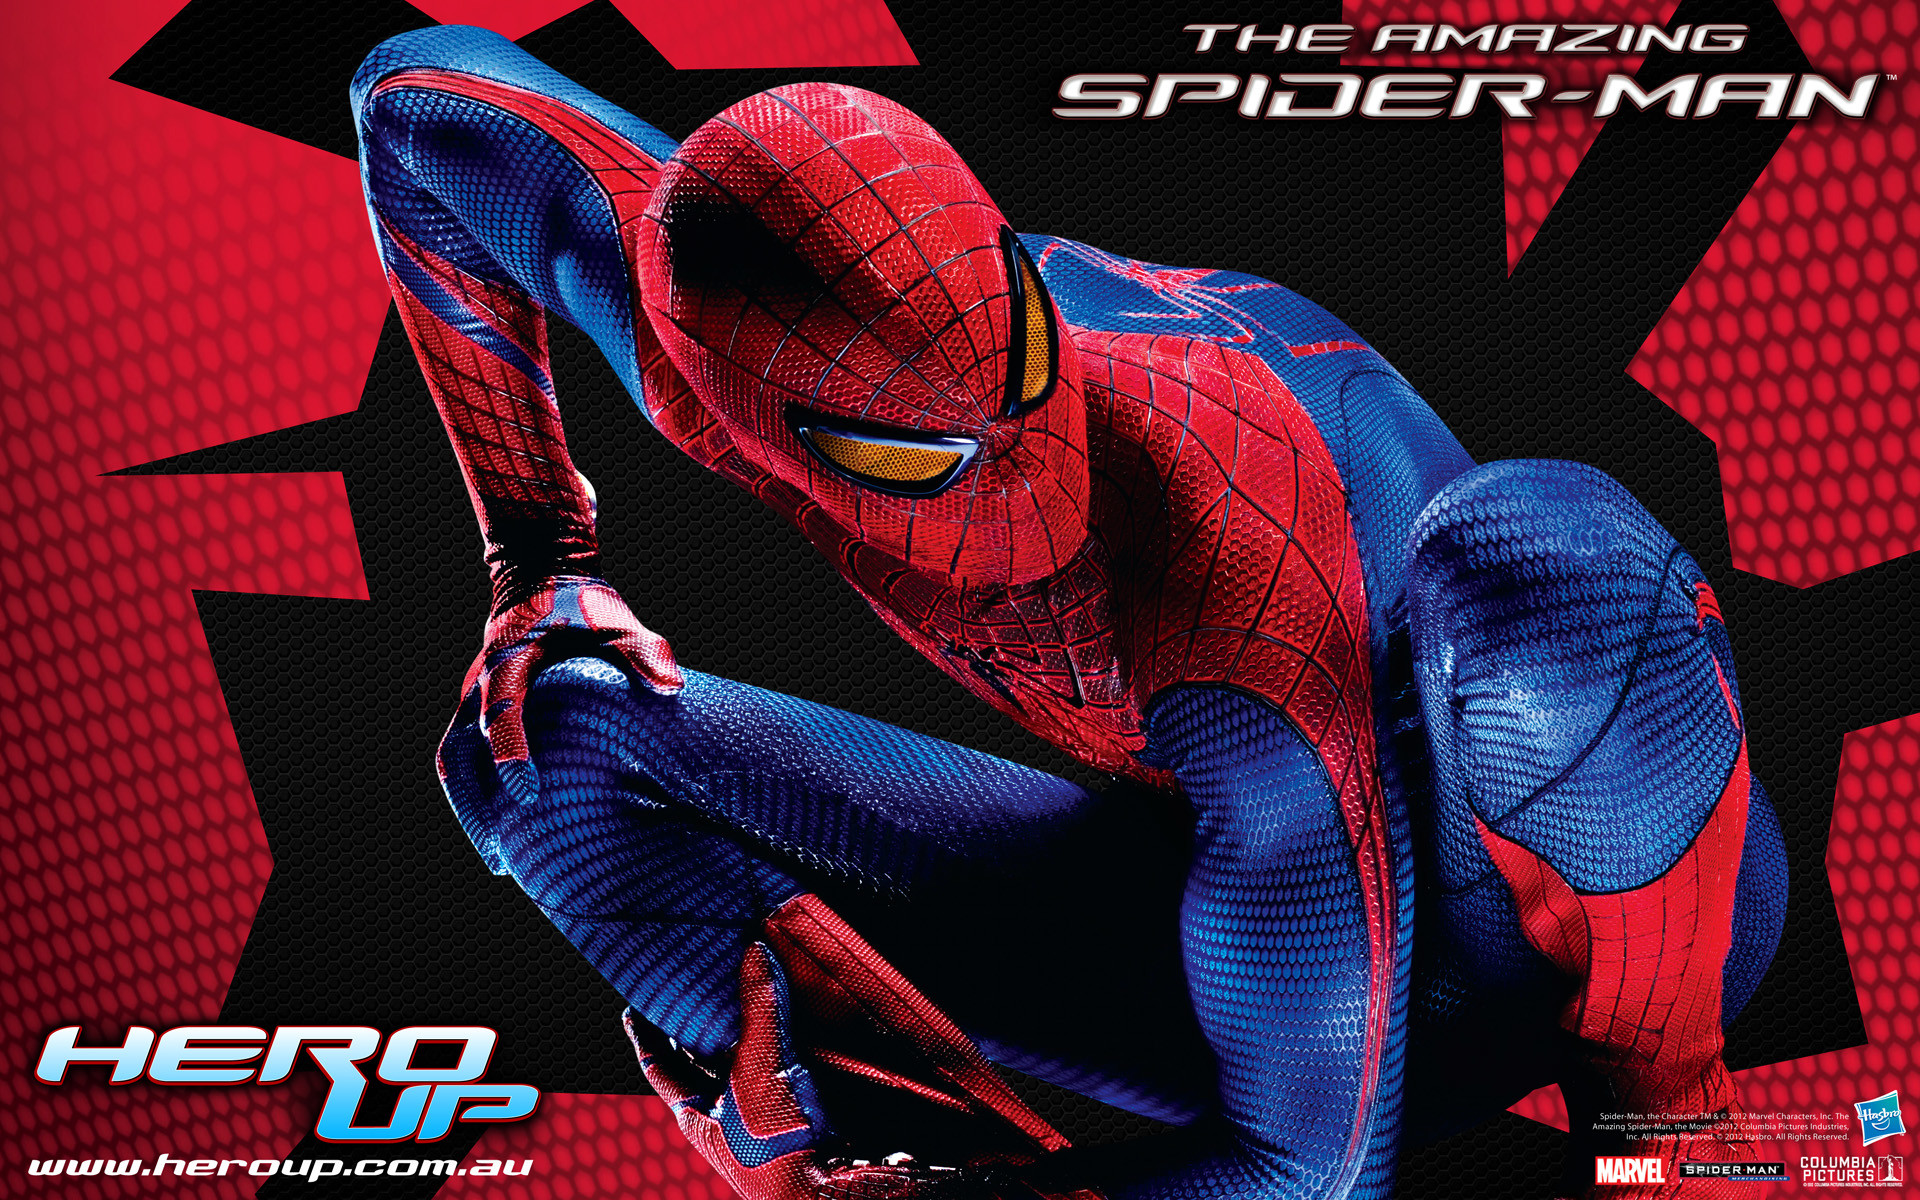 The Amazing SpiderMan Wallpapers K HD Desktop Backgrounds 900497 The Amazing Spider Man